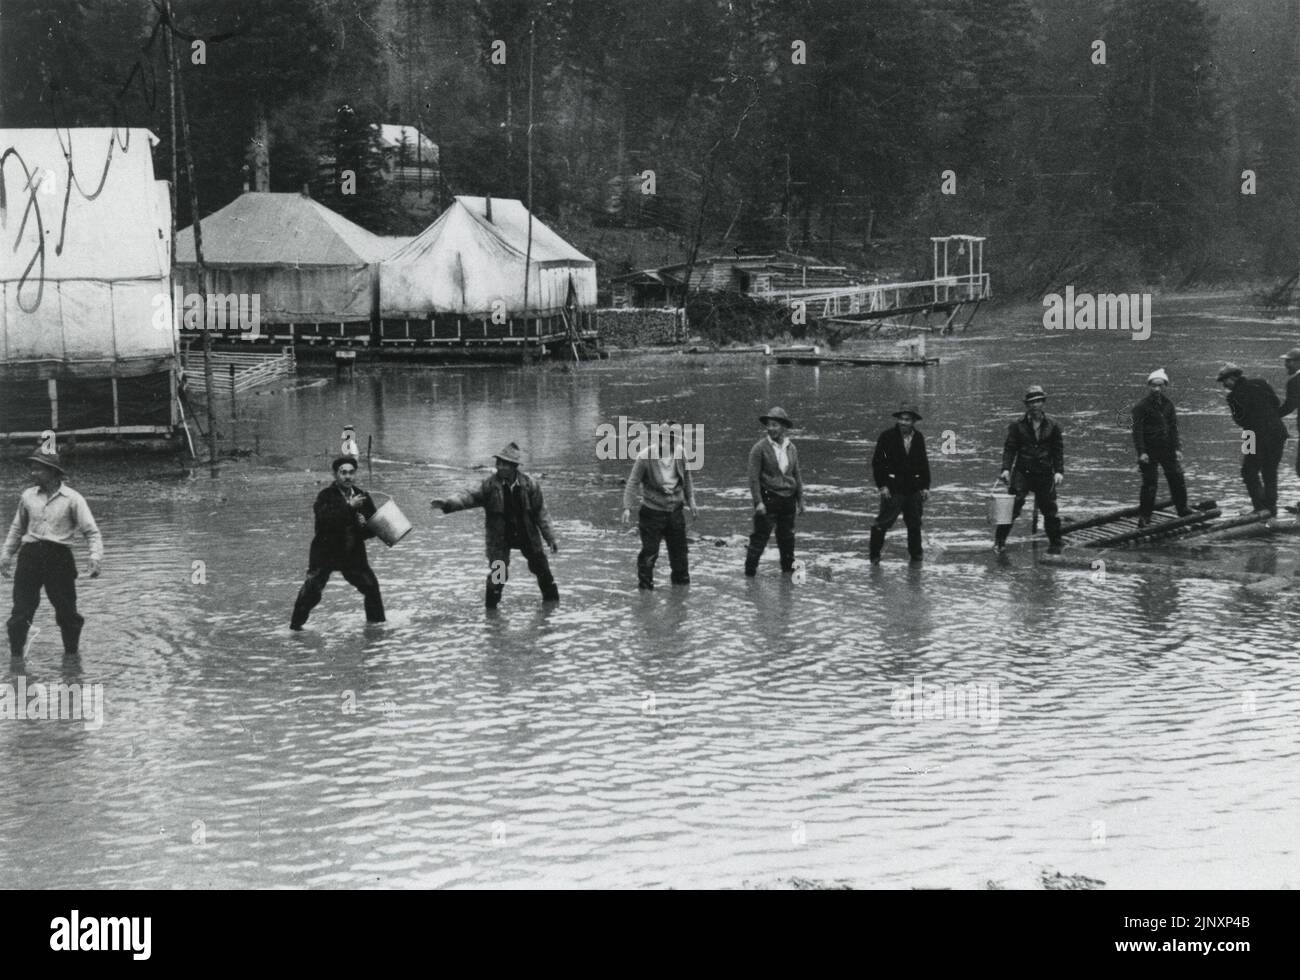 Title: View of workers battling flood waters at Decoigne Camp  Reminder: Reminder: No known copyright restrictions. Please credit UBC Library as the image source. For more information see http://digitalcollections.library.ubc.ca/cdm/about.   Date: 1942-05  Access Identifier: JCPC  05 011  Source: Original Format: University of British Columbia Library. Rare Books are Special Collections. Japanese Canadian Research Collection. JCPC  05 011  Permanent URL: http://digitalcollections.library.ubc.ca/cdm/ref/collection/jphotos/id/258 Stock Photo